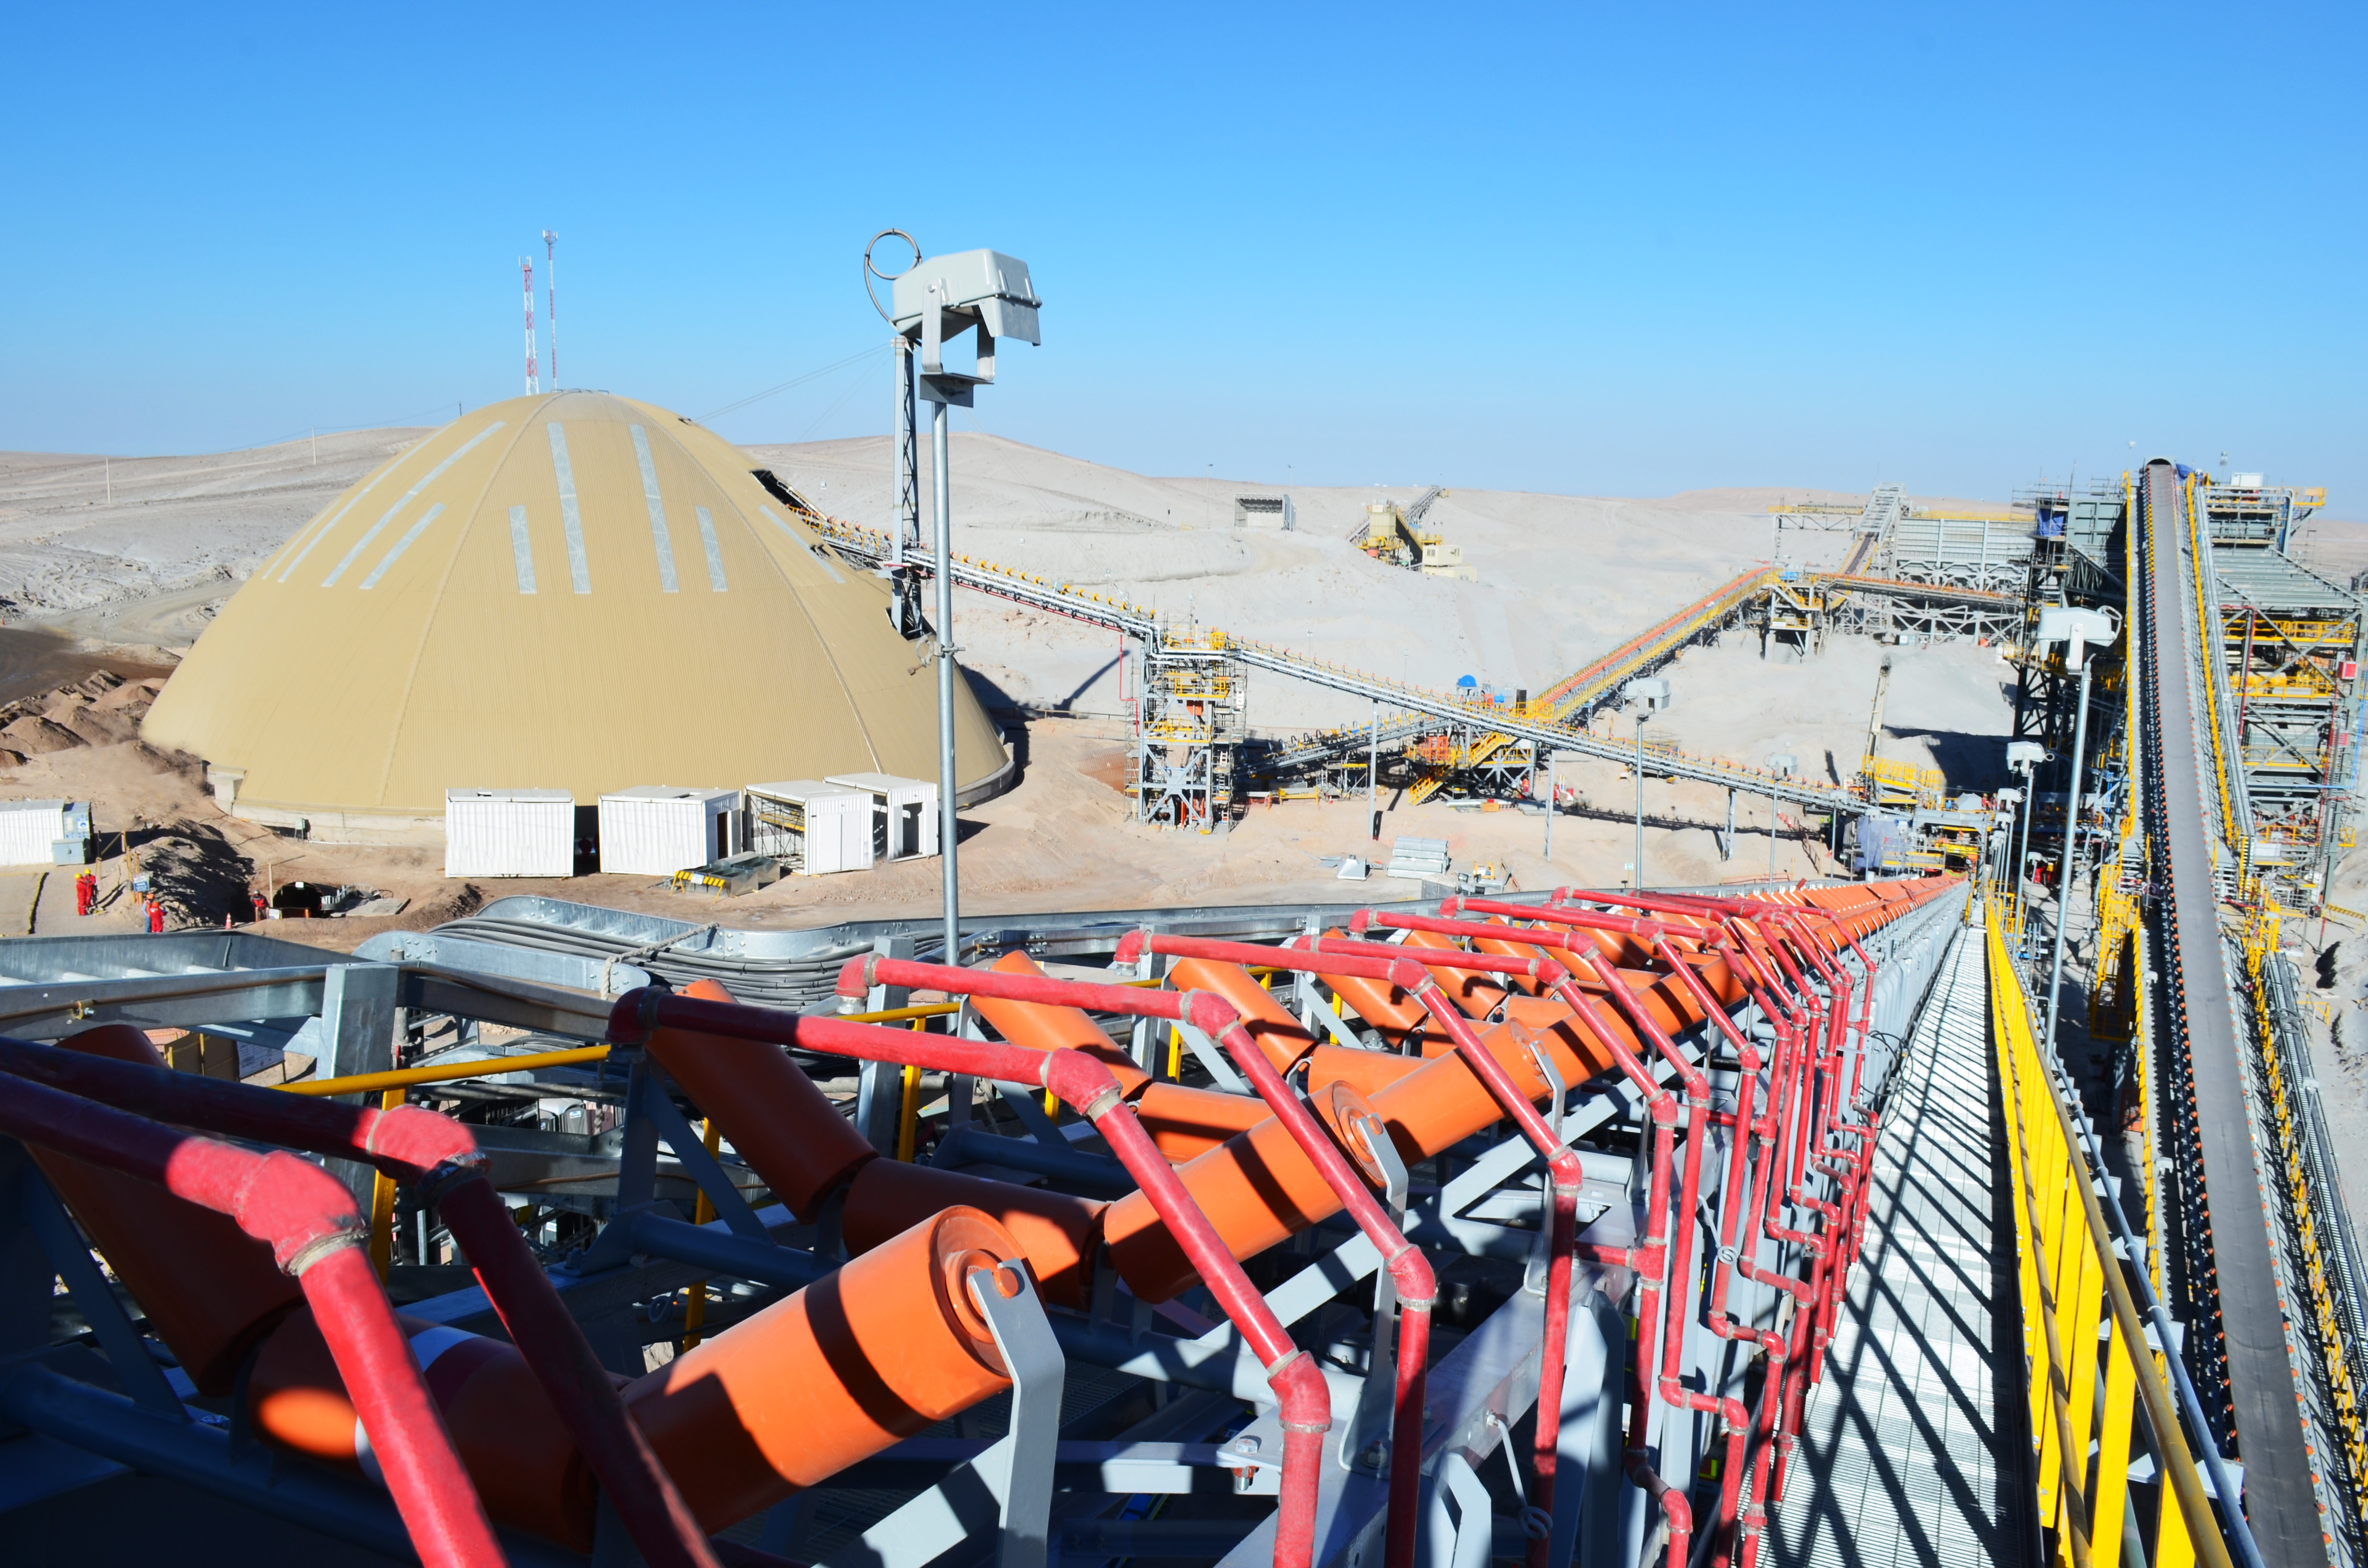 Metso material handling systems involves all experience and expertise in material transportation in mining applications.